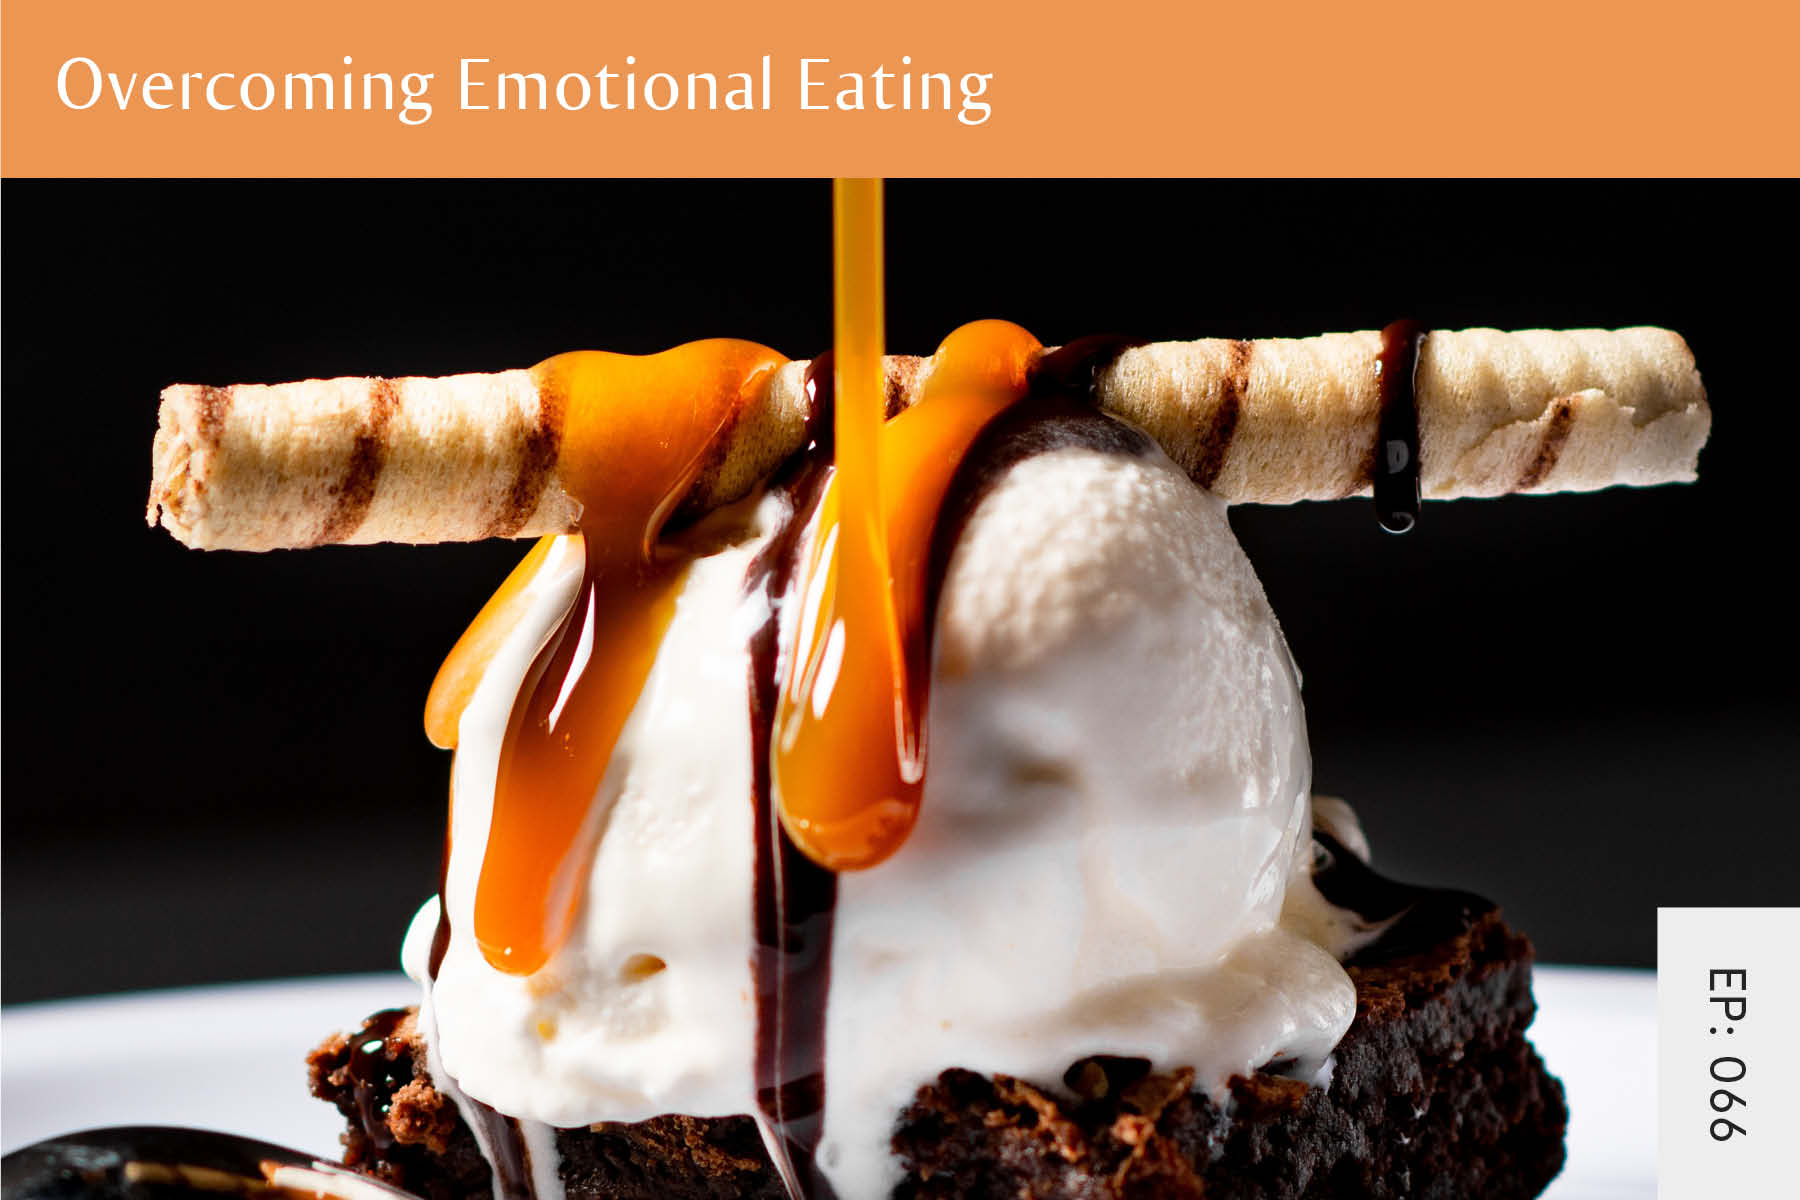 066: Overcoming Emotional Eating - Seven Health: Eating Disorder Recovery and Anti Diet Nutritionist